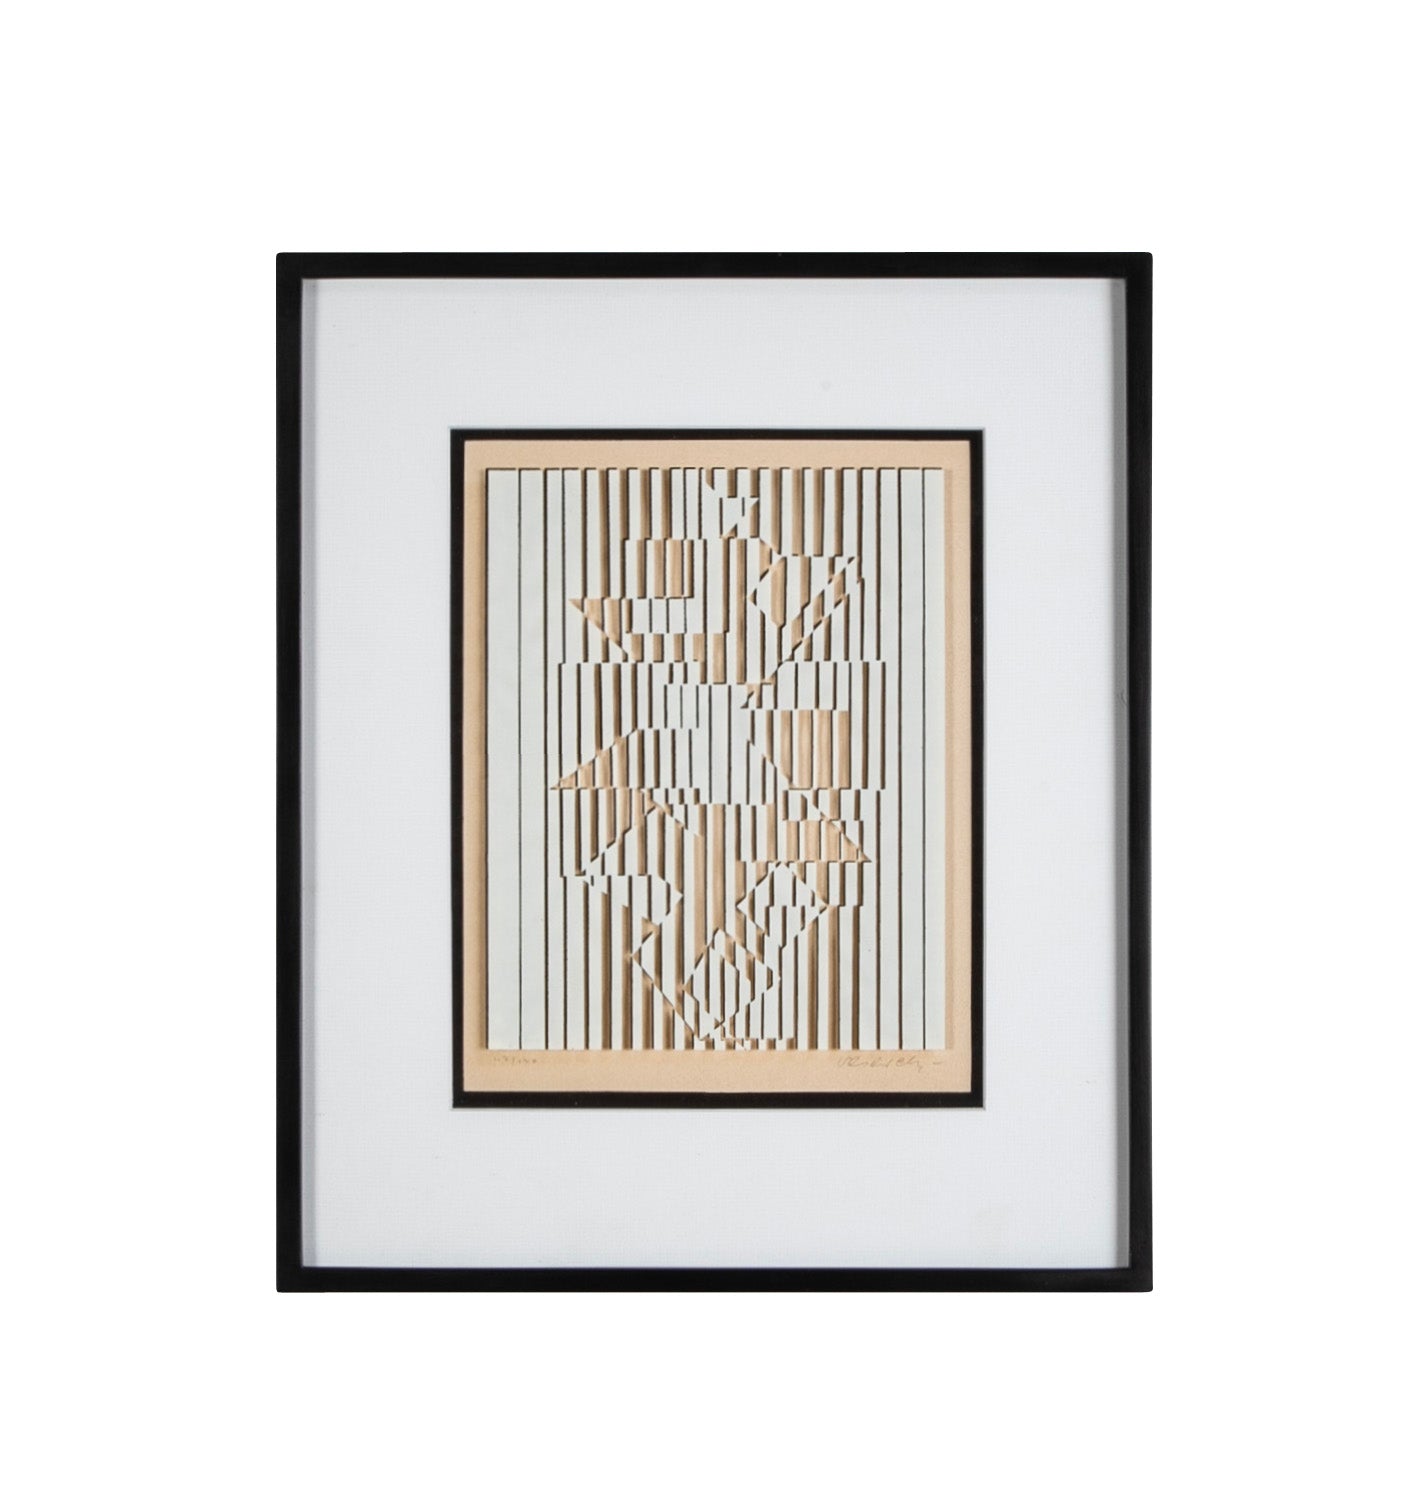 Untitled Screenprint by Franco-Hungarian Artist Victor Vasarely